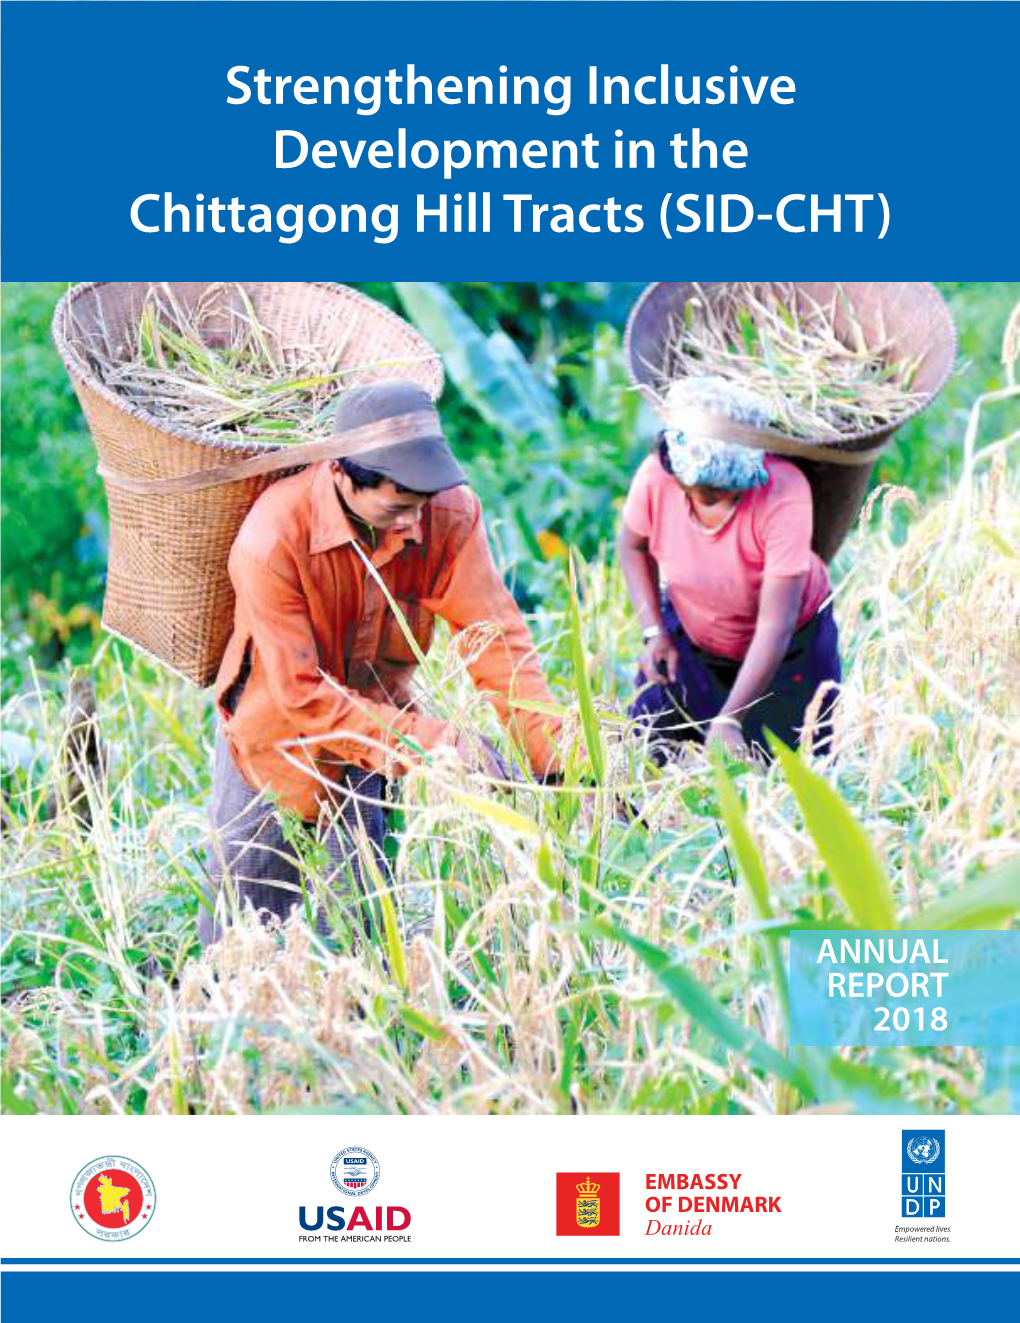 Strengthening Inclusive Development in the Chittagong Hill Tracts (SID-CHT)